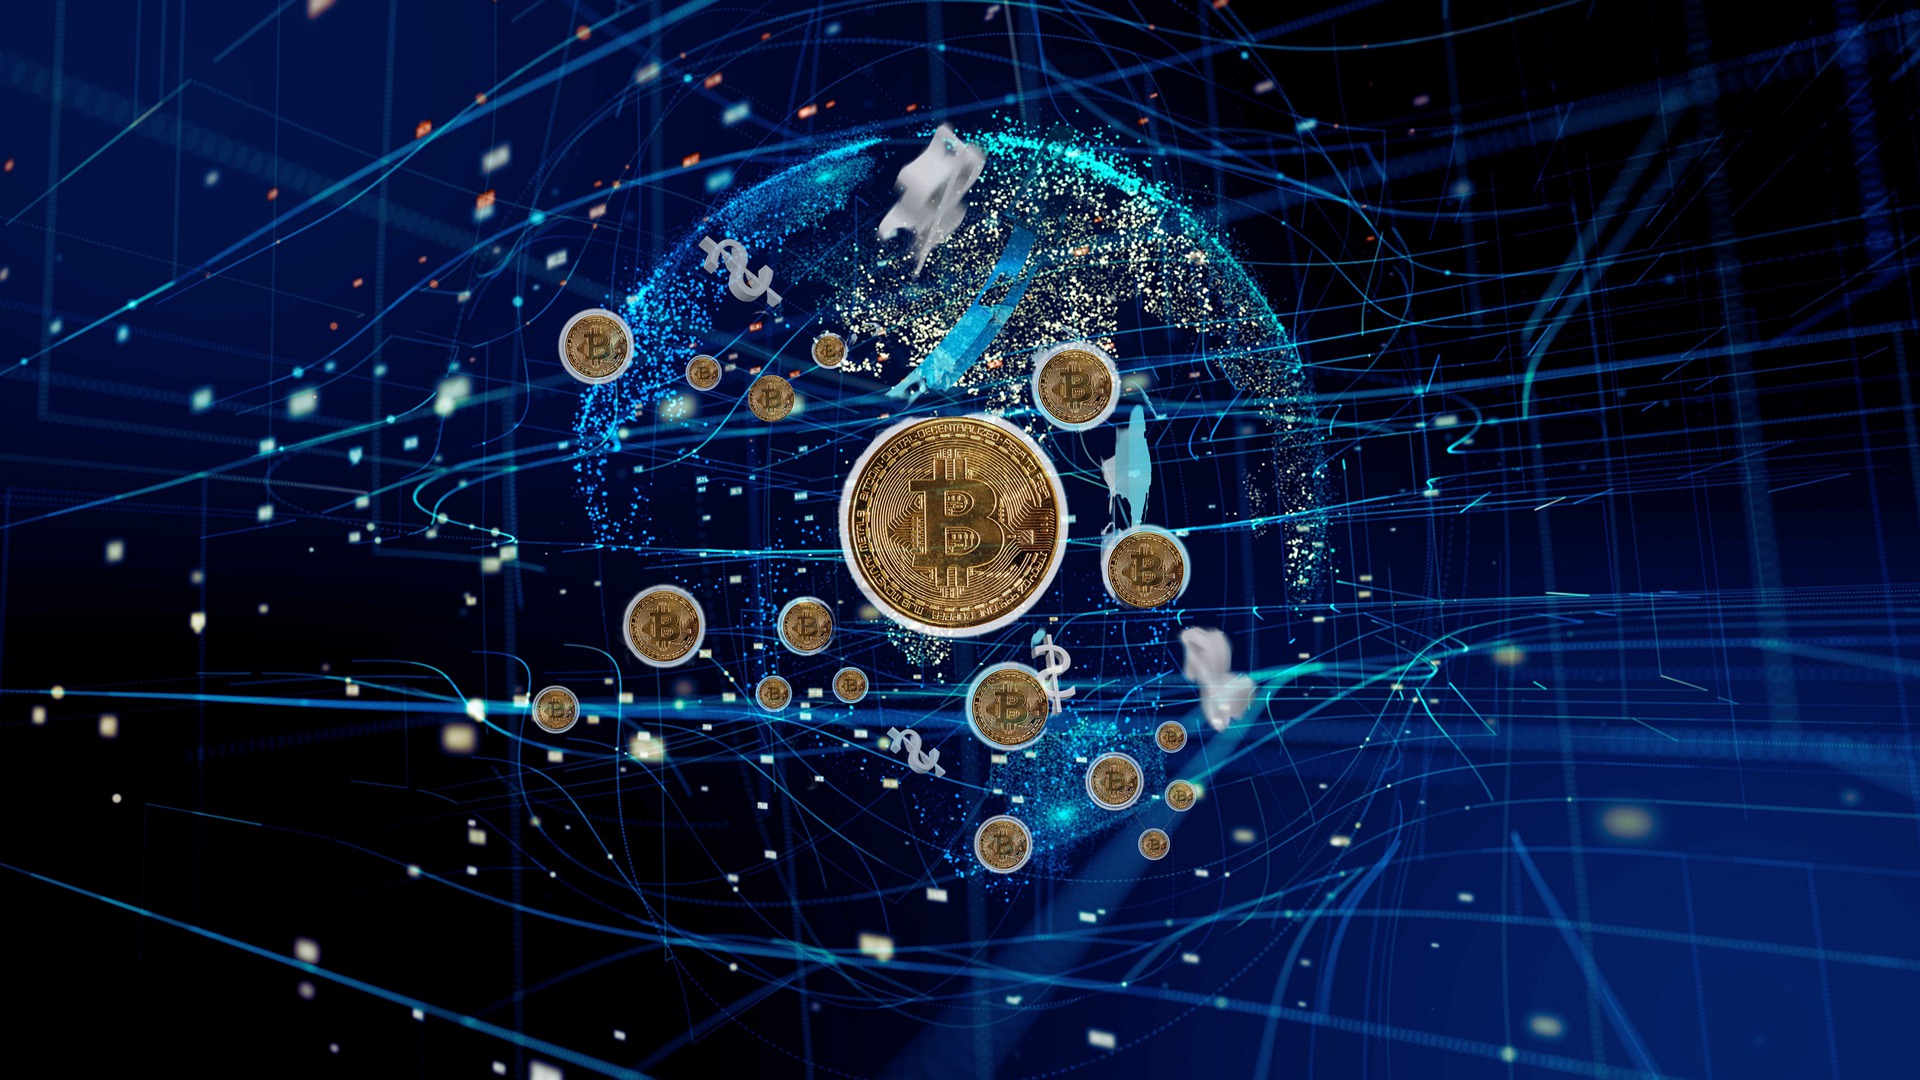 What are the key factors that drive the cryptocurrency market?